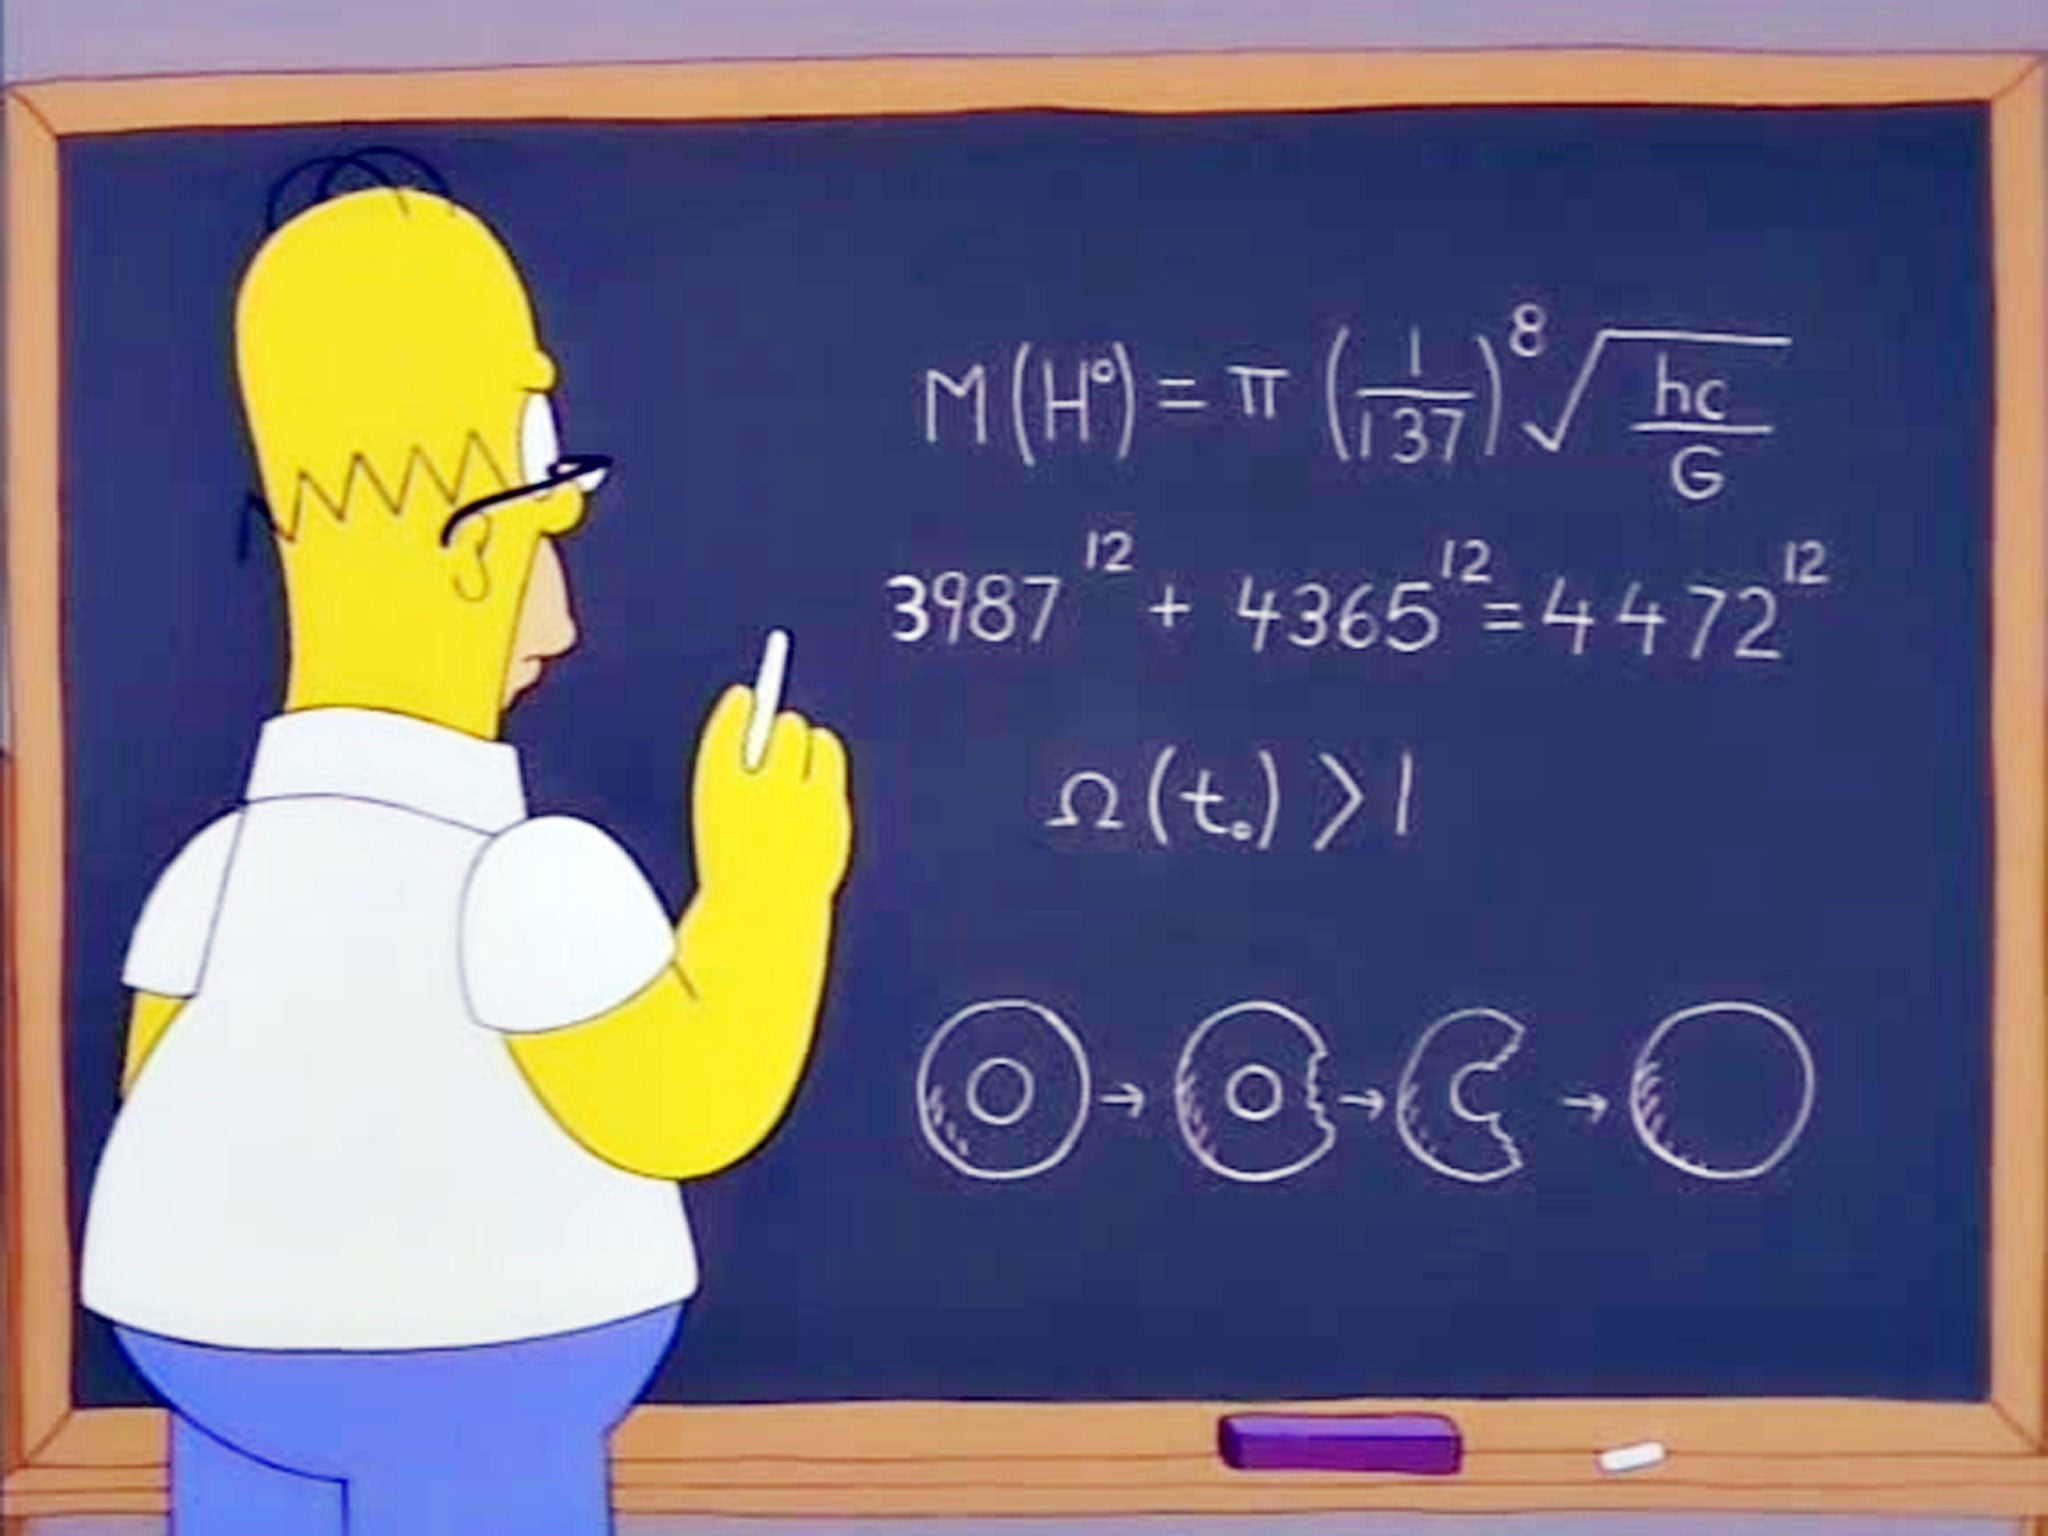 Homer’s equation, in an episode in 1998, comes close to the truth, as revealed 14 years later